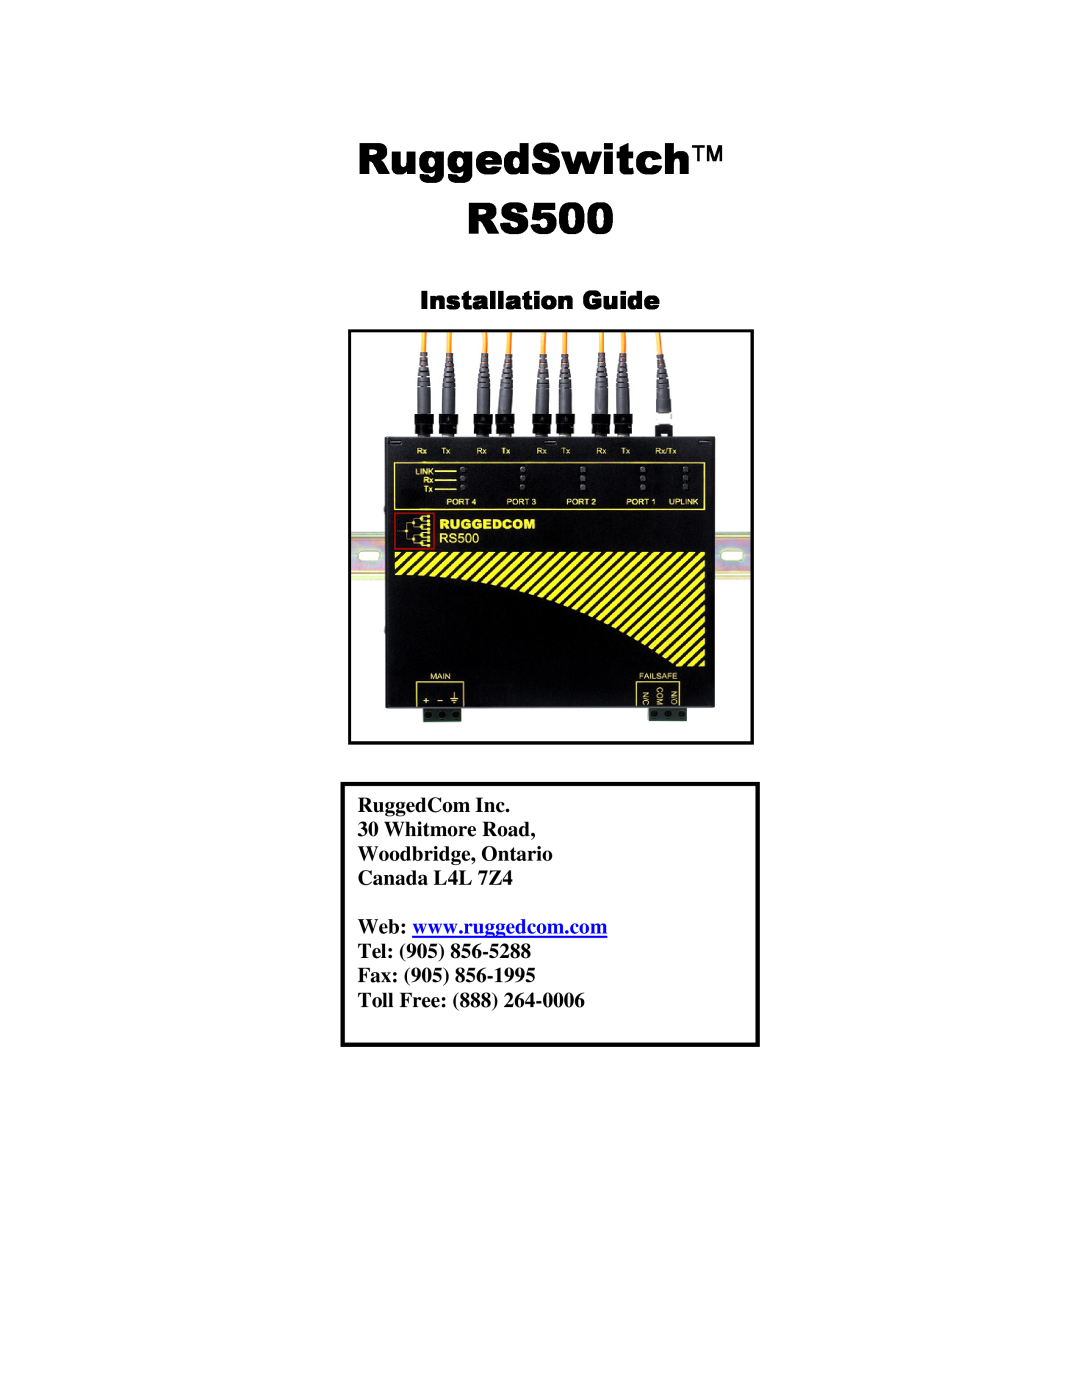 RuggedCom manual RuggedSwitch RS500, Installation Guide, Tel 905 Fax 905 Toll Free 888 